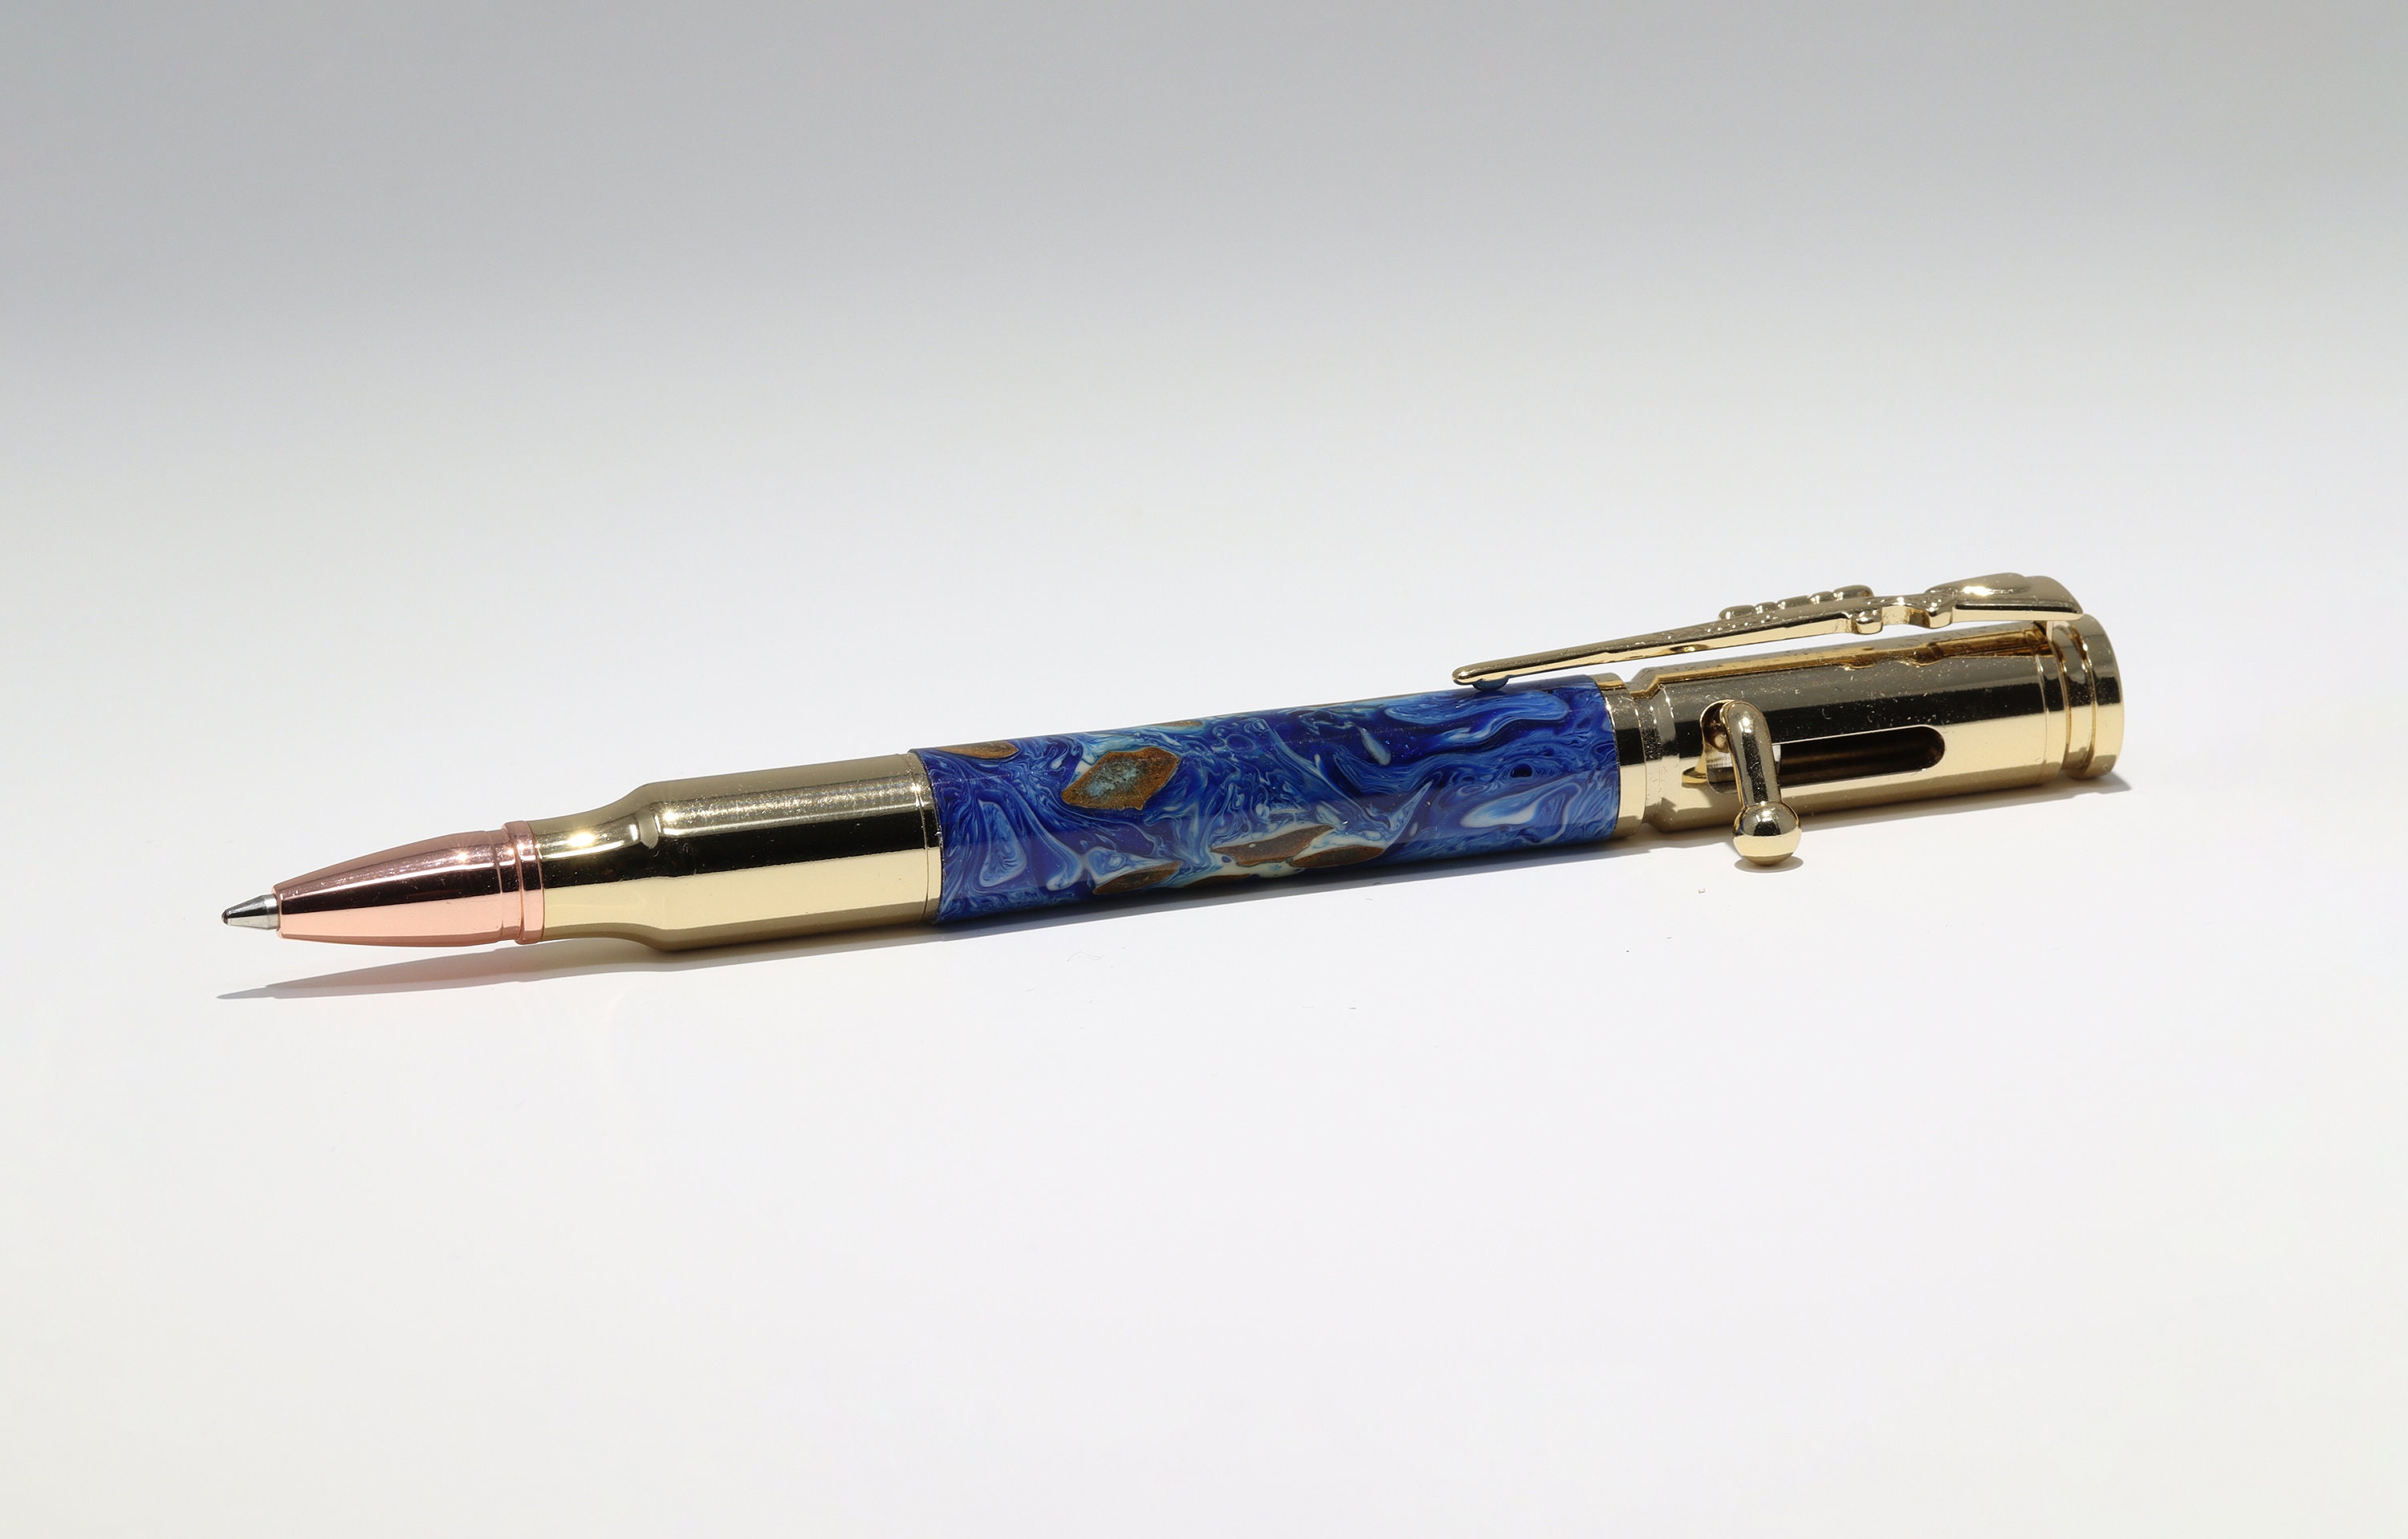 Genuine Gold Leaf Fountain Pen, Luxury Pen with 24K Gold Finish